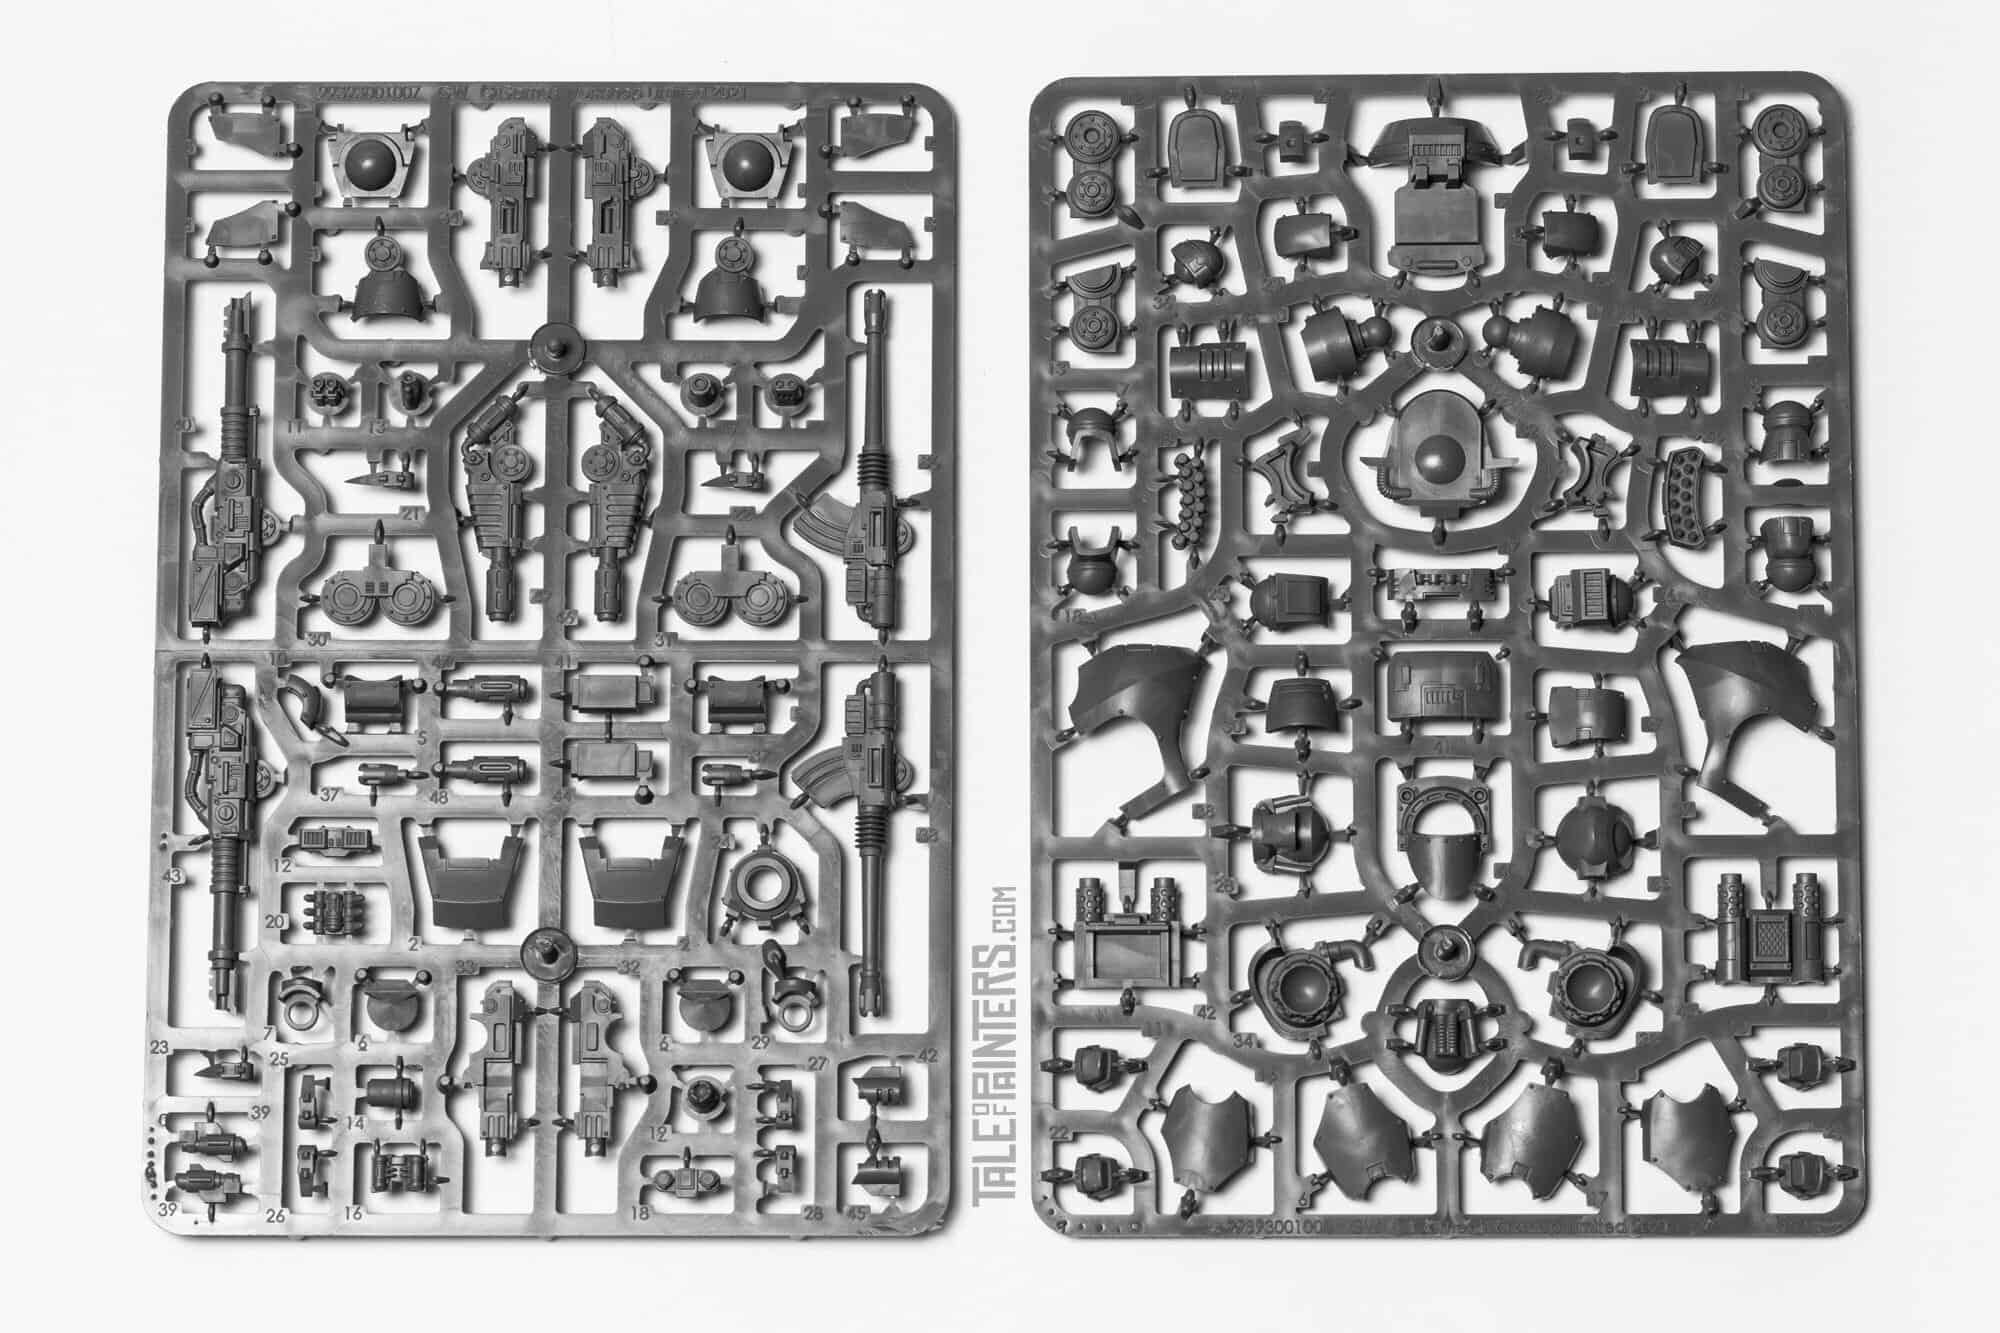 Warhammer_The_Horus_Heresy_Age_of_Darkness_Unboxing_Contemptor_Dreadnought_Sprues